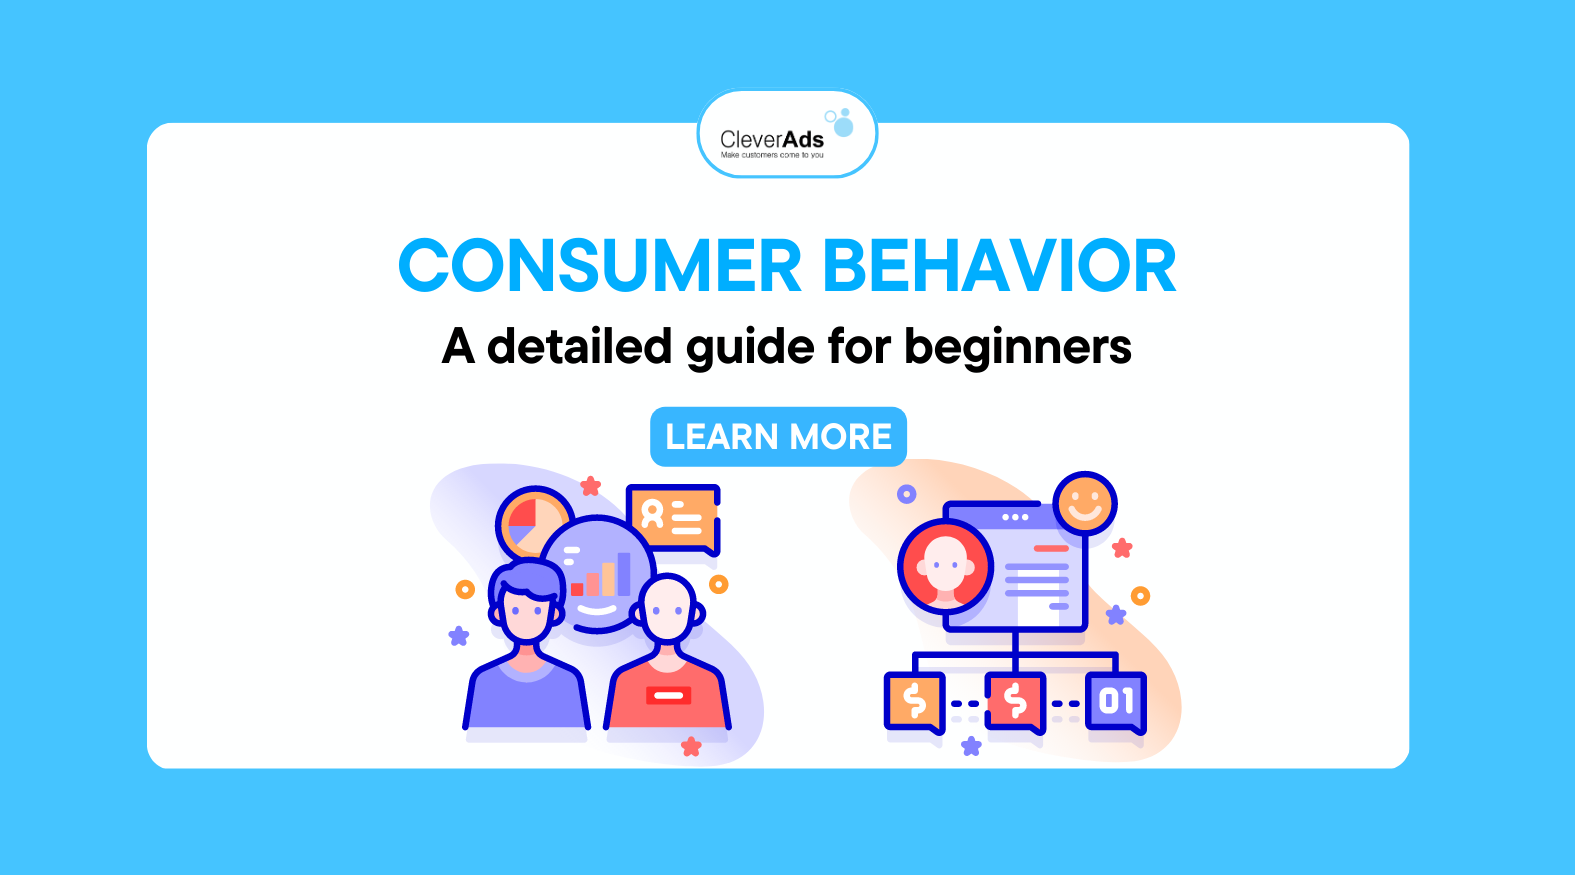 What is consumer behavior? A detailed guide for beginners